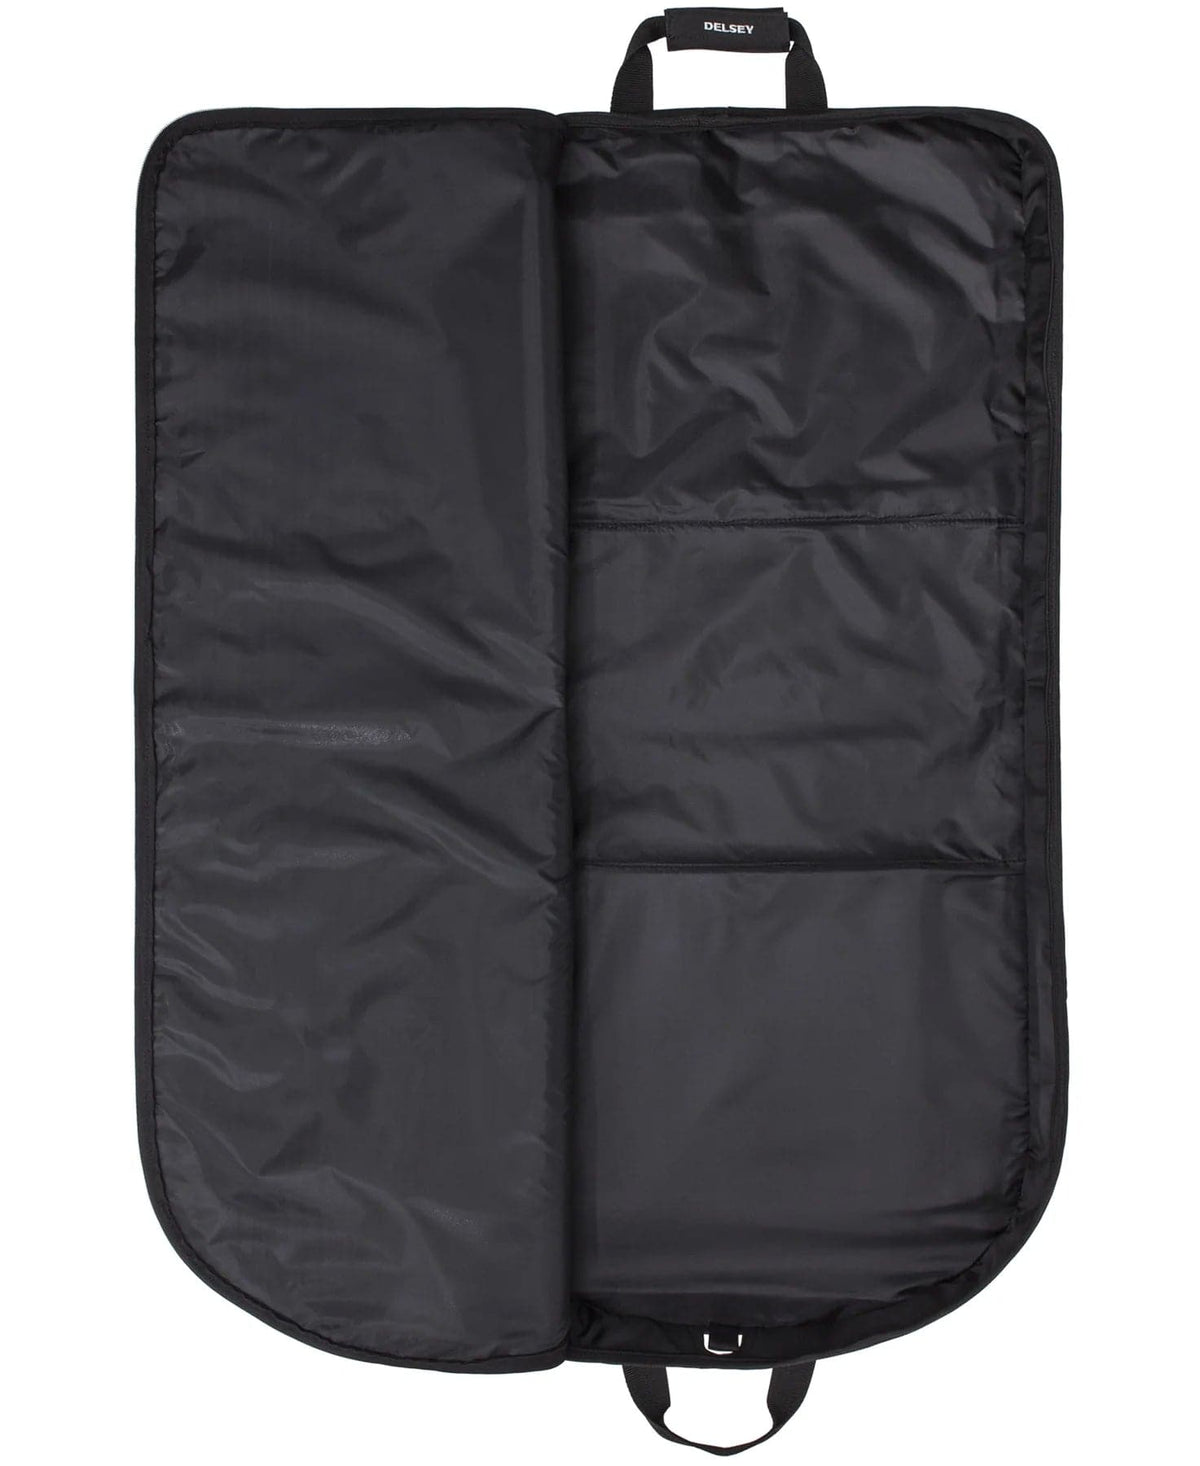 Delsey Garment Cover Bag - 42" Small